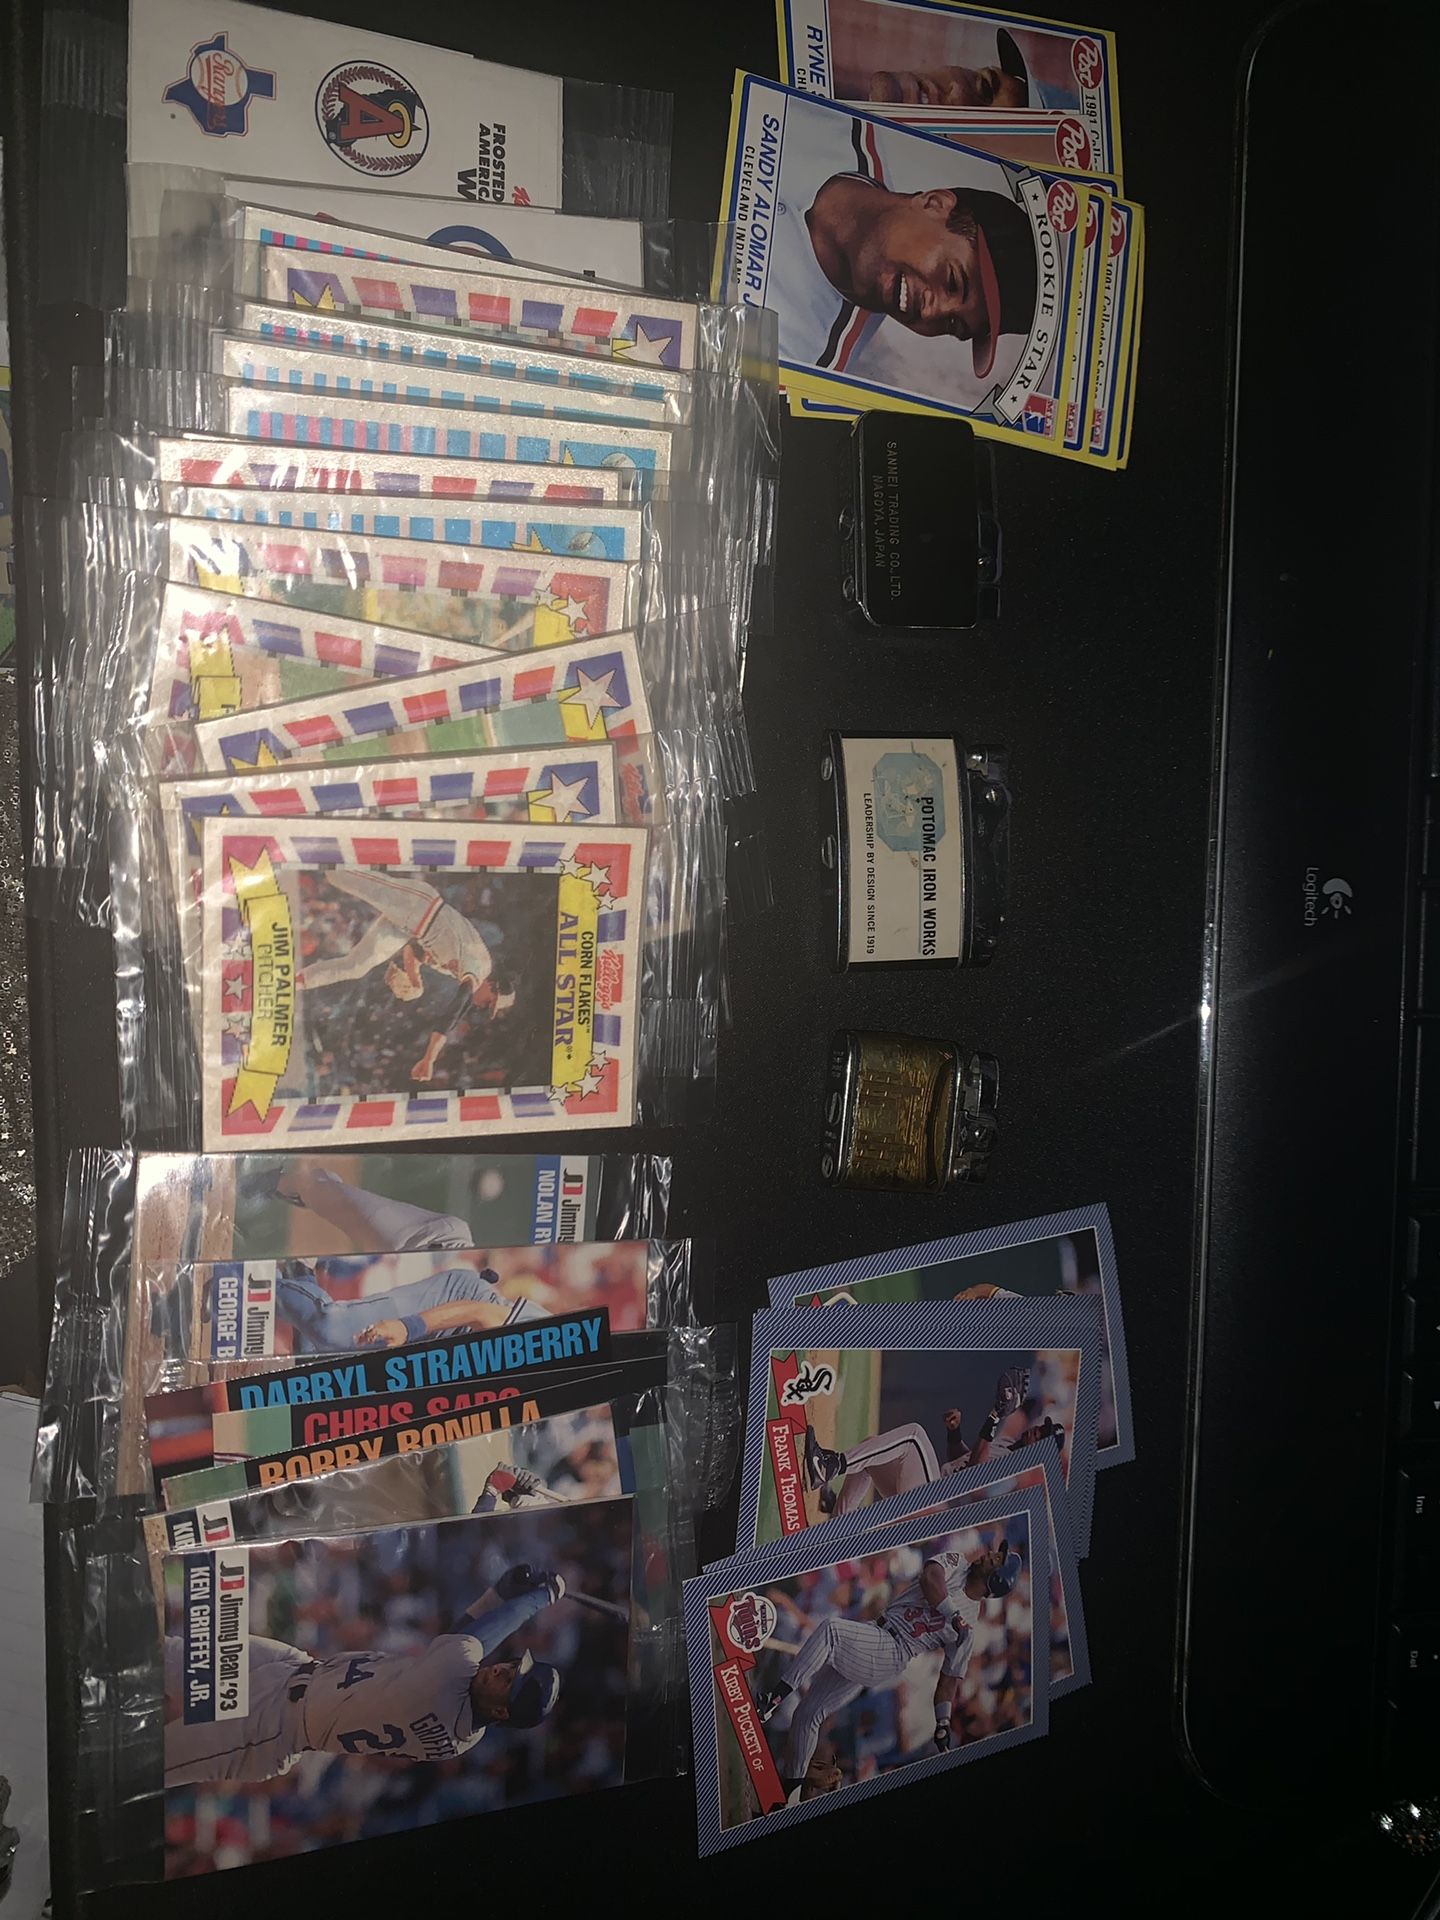 Old baseball cards and 3 old lighters